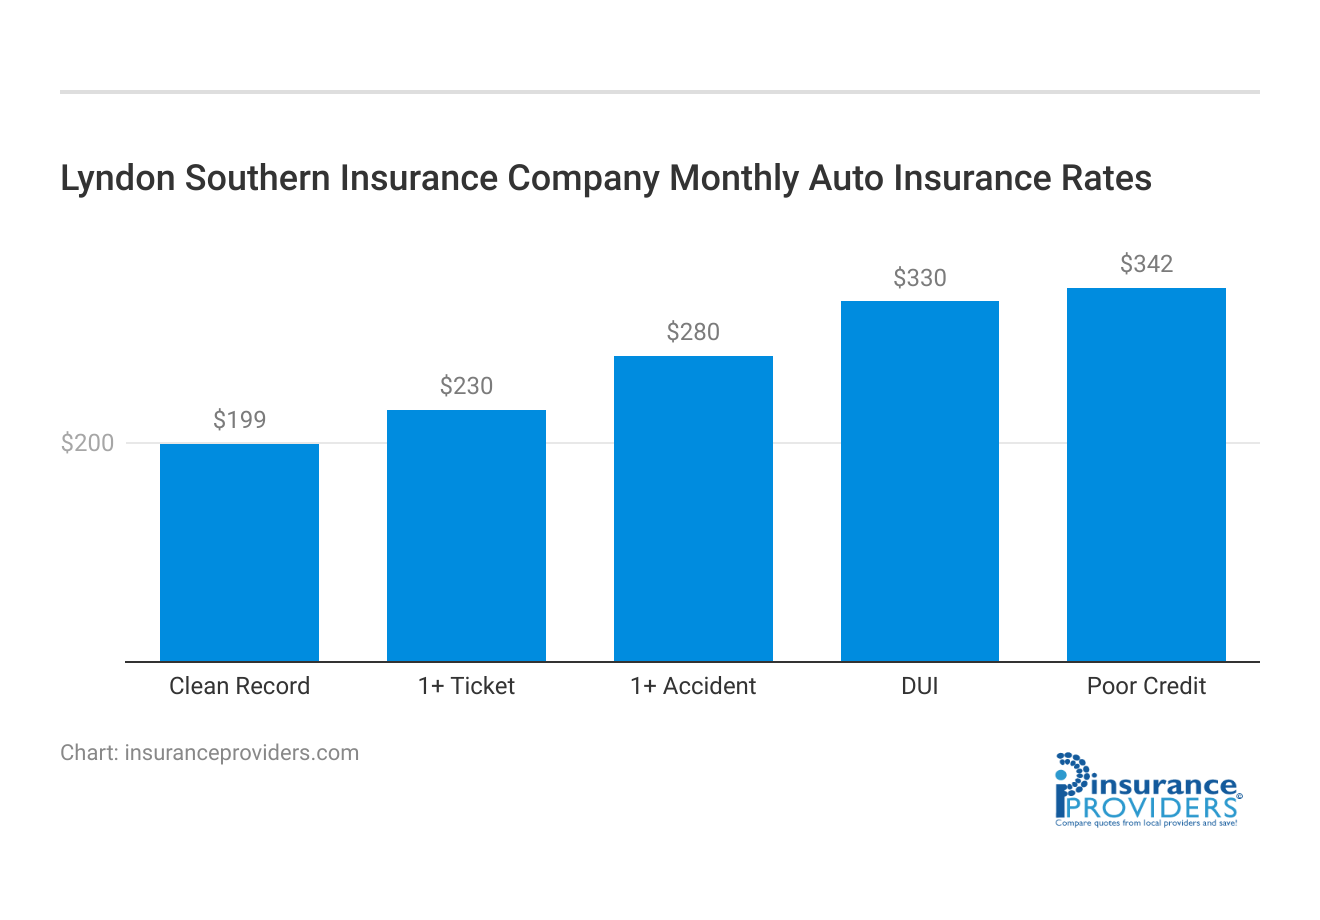 <h3>Lyndon Southern Insurance Company Monthly Auto Insurance Rates</h3>